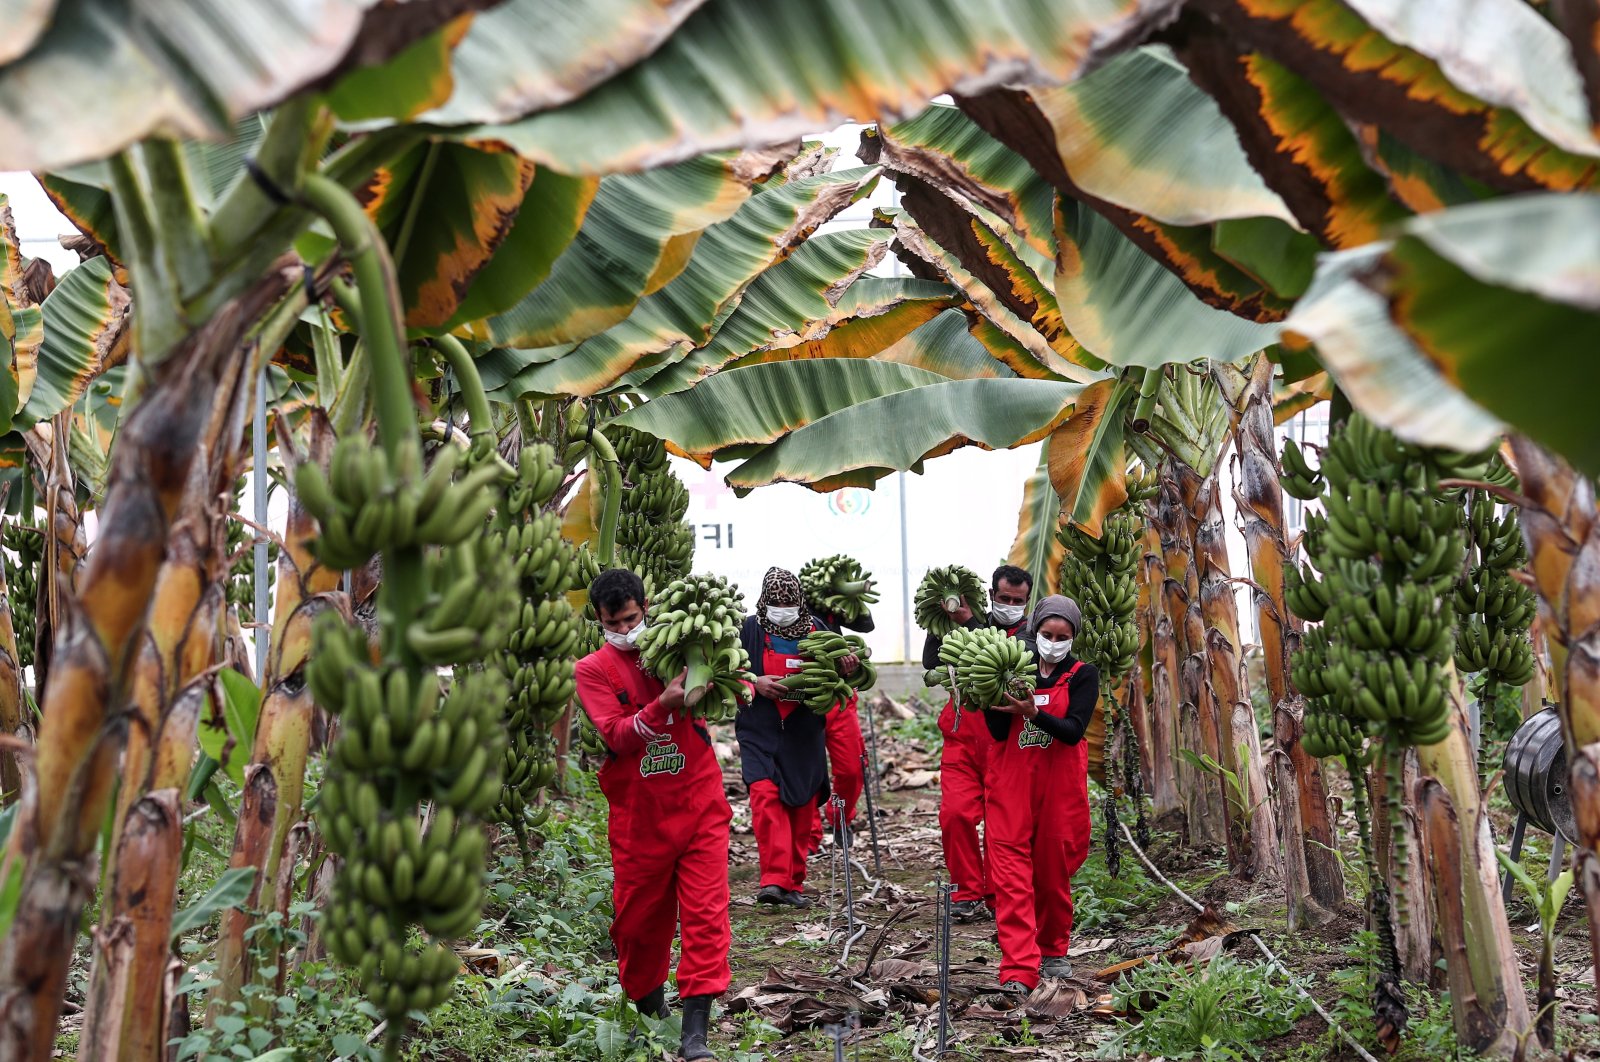 Vocational training center volunteers, Syrian refugees collect fruit during the banana harvest, near the Turkey-Syria border in Reyhanlı district of Hatay, Turkey, 22 February 2022. (EPA Photo)